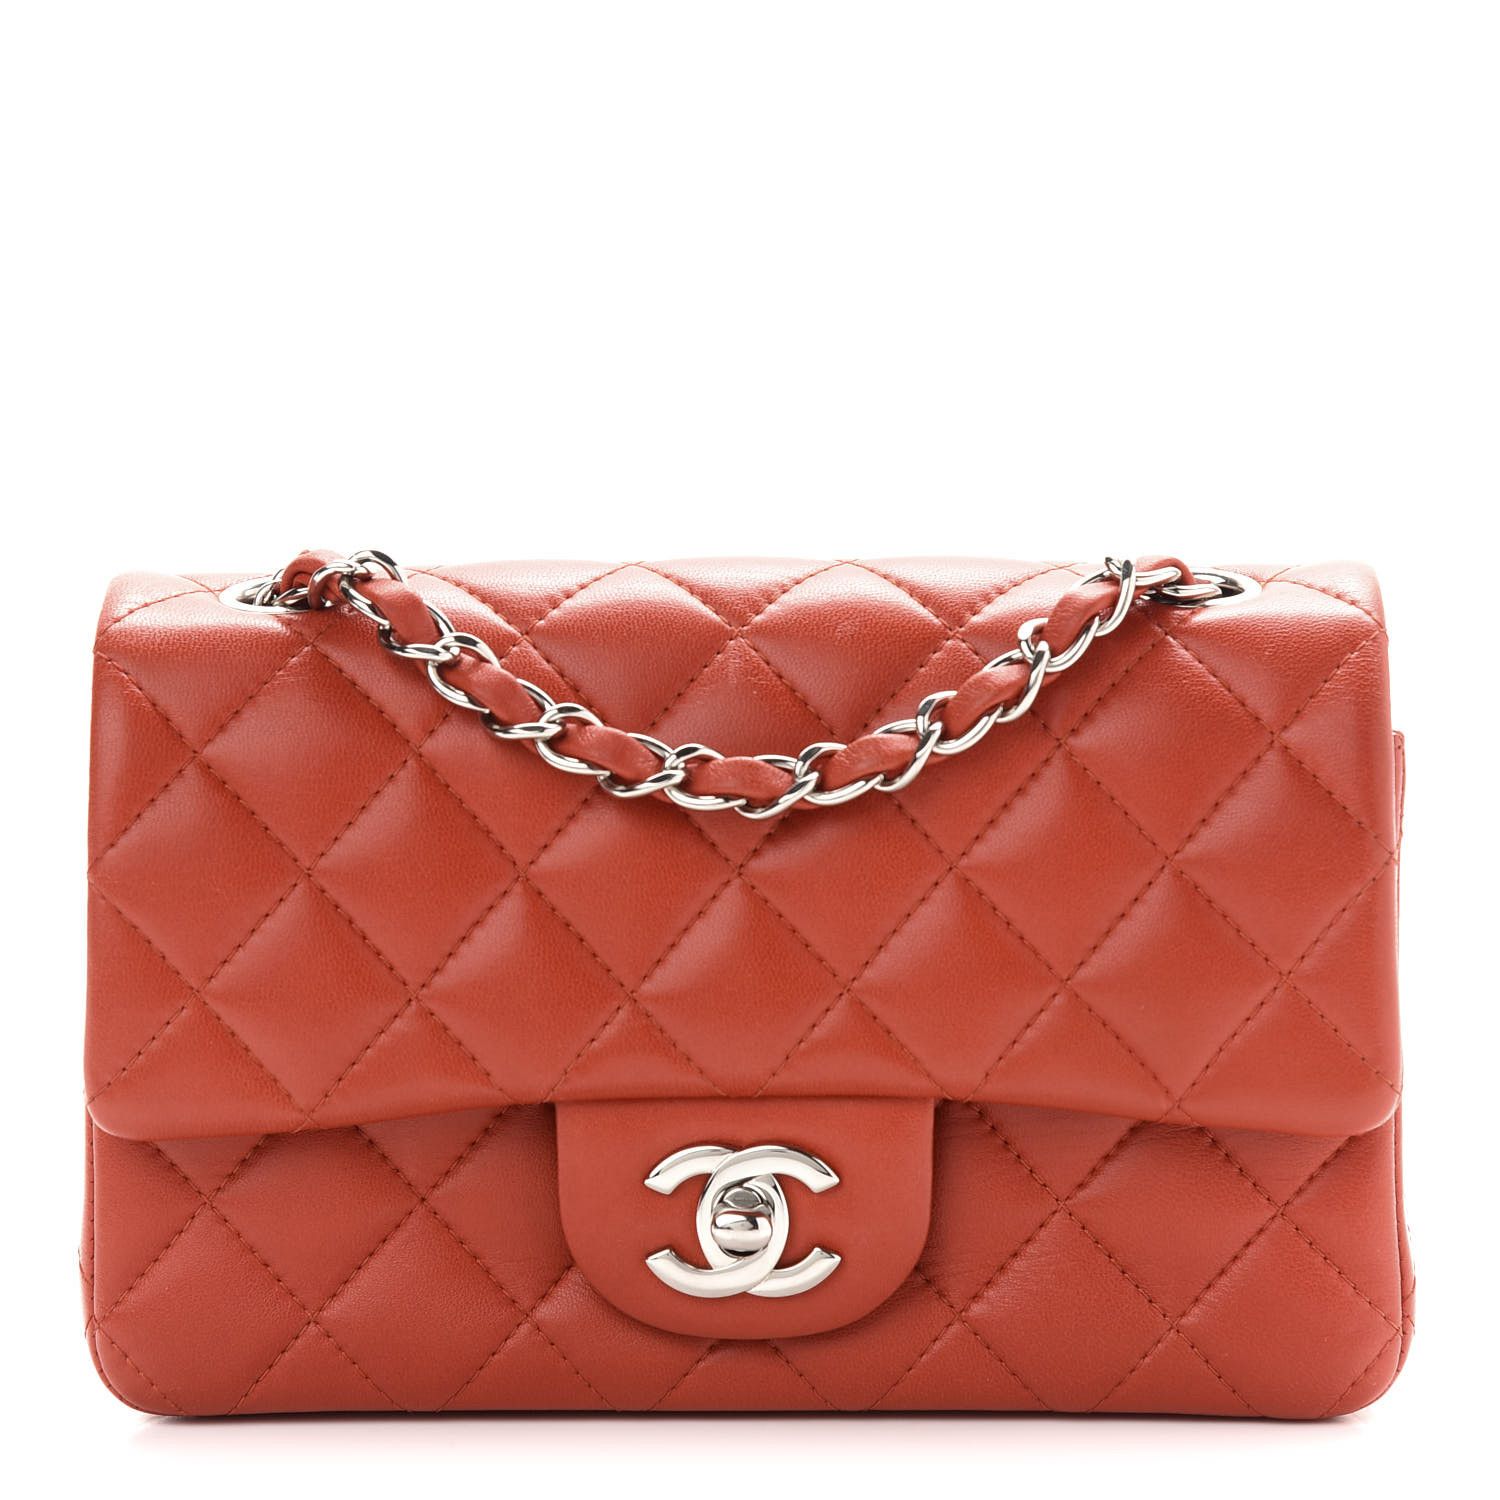 CHANEL Lambskin Quilted Mini Rectangular Flap Red | FASHIONPHILE | Fashionphile